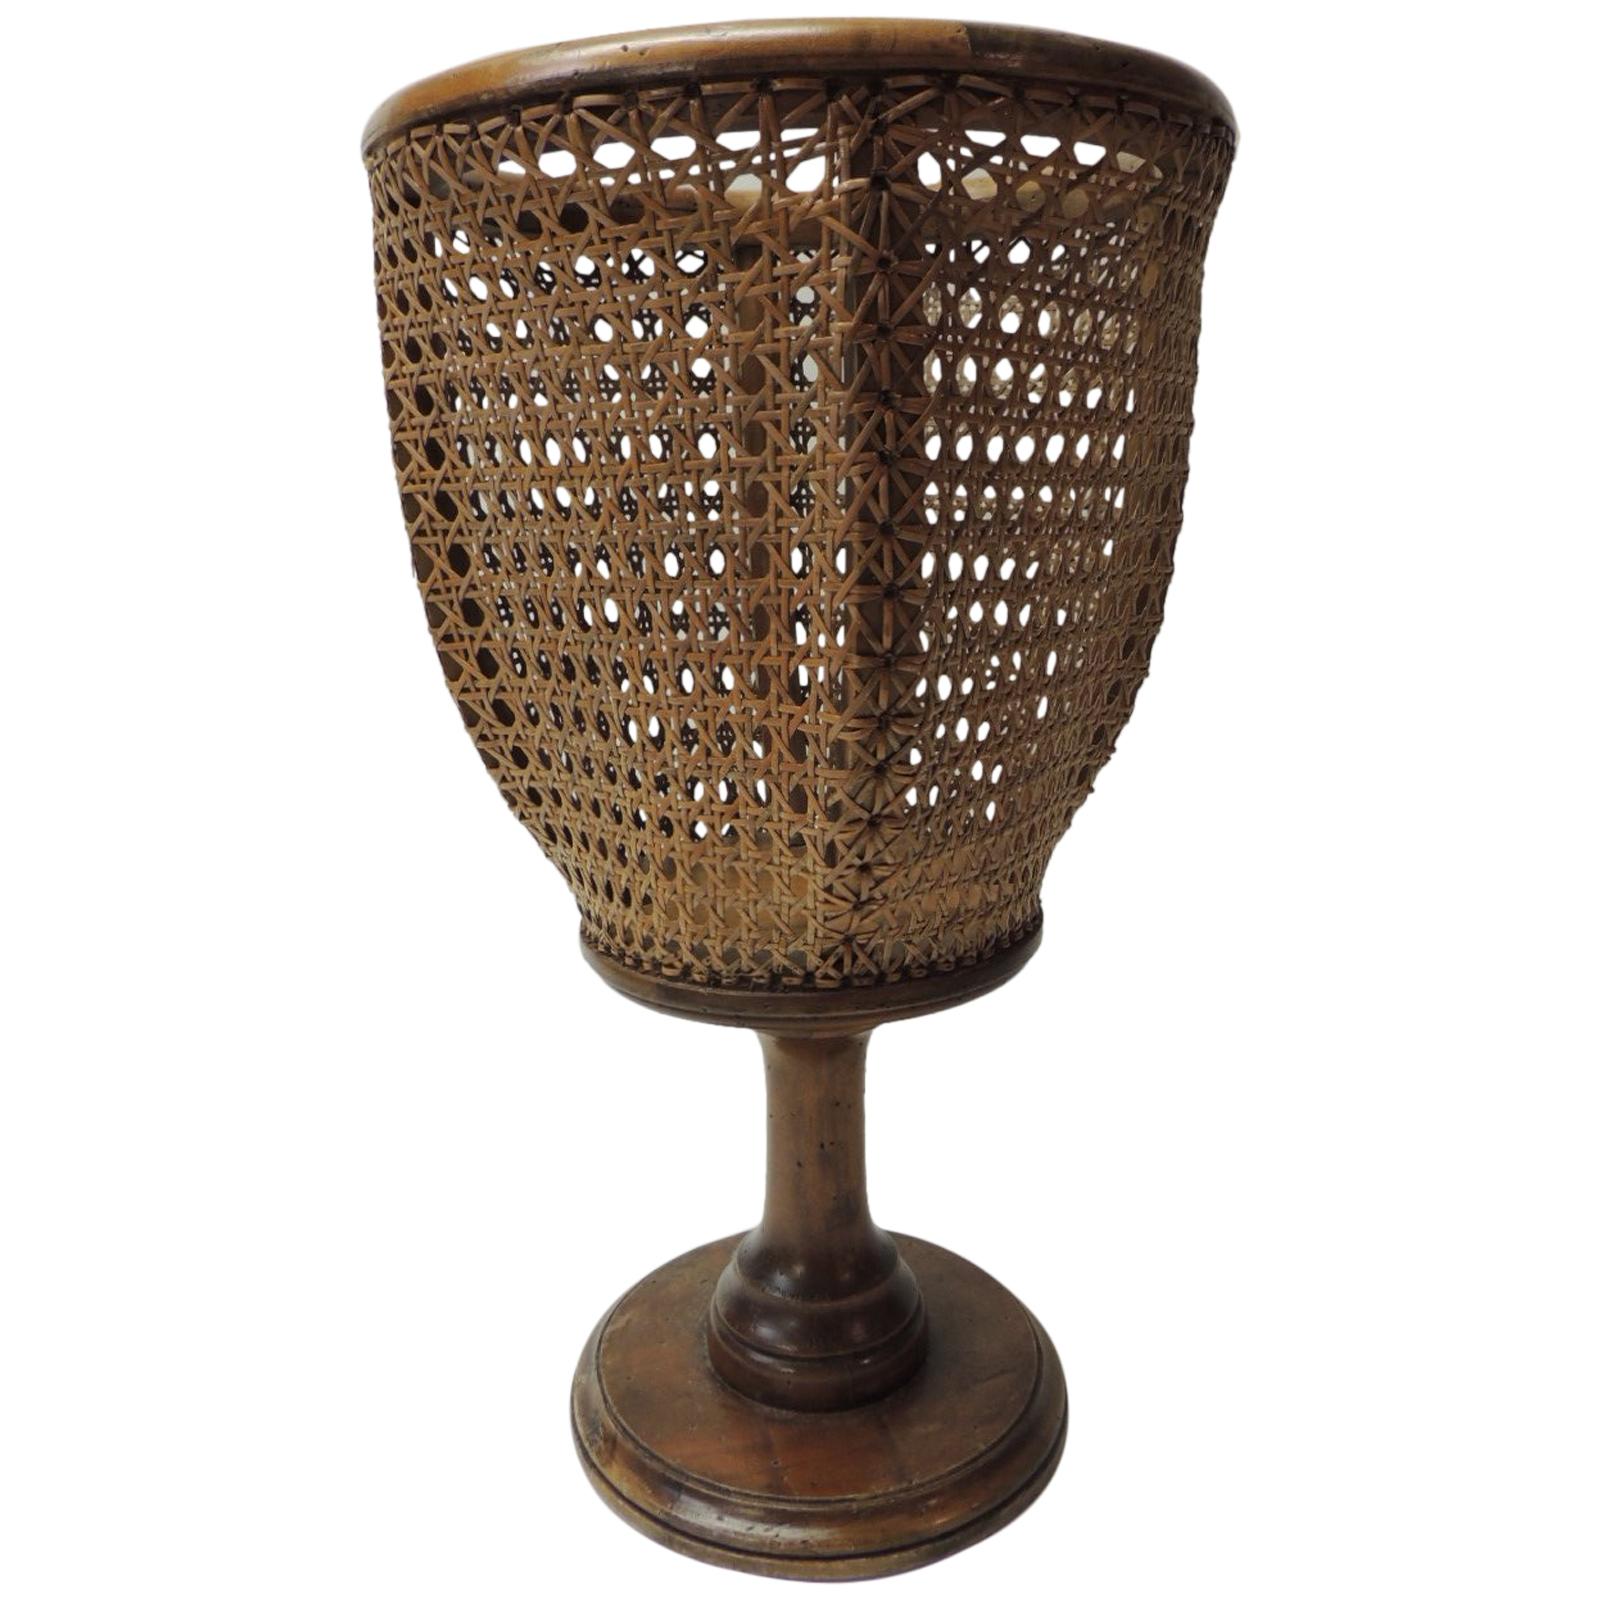 Vintage Tall Bent Wood and Wicker Planter